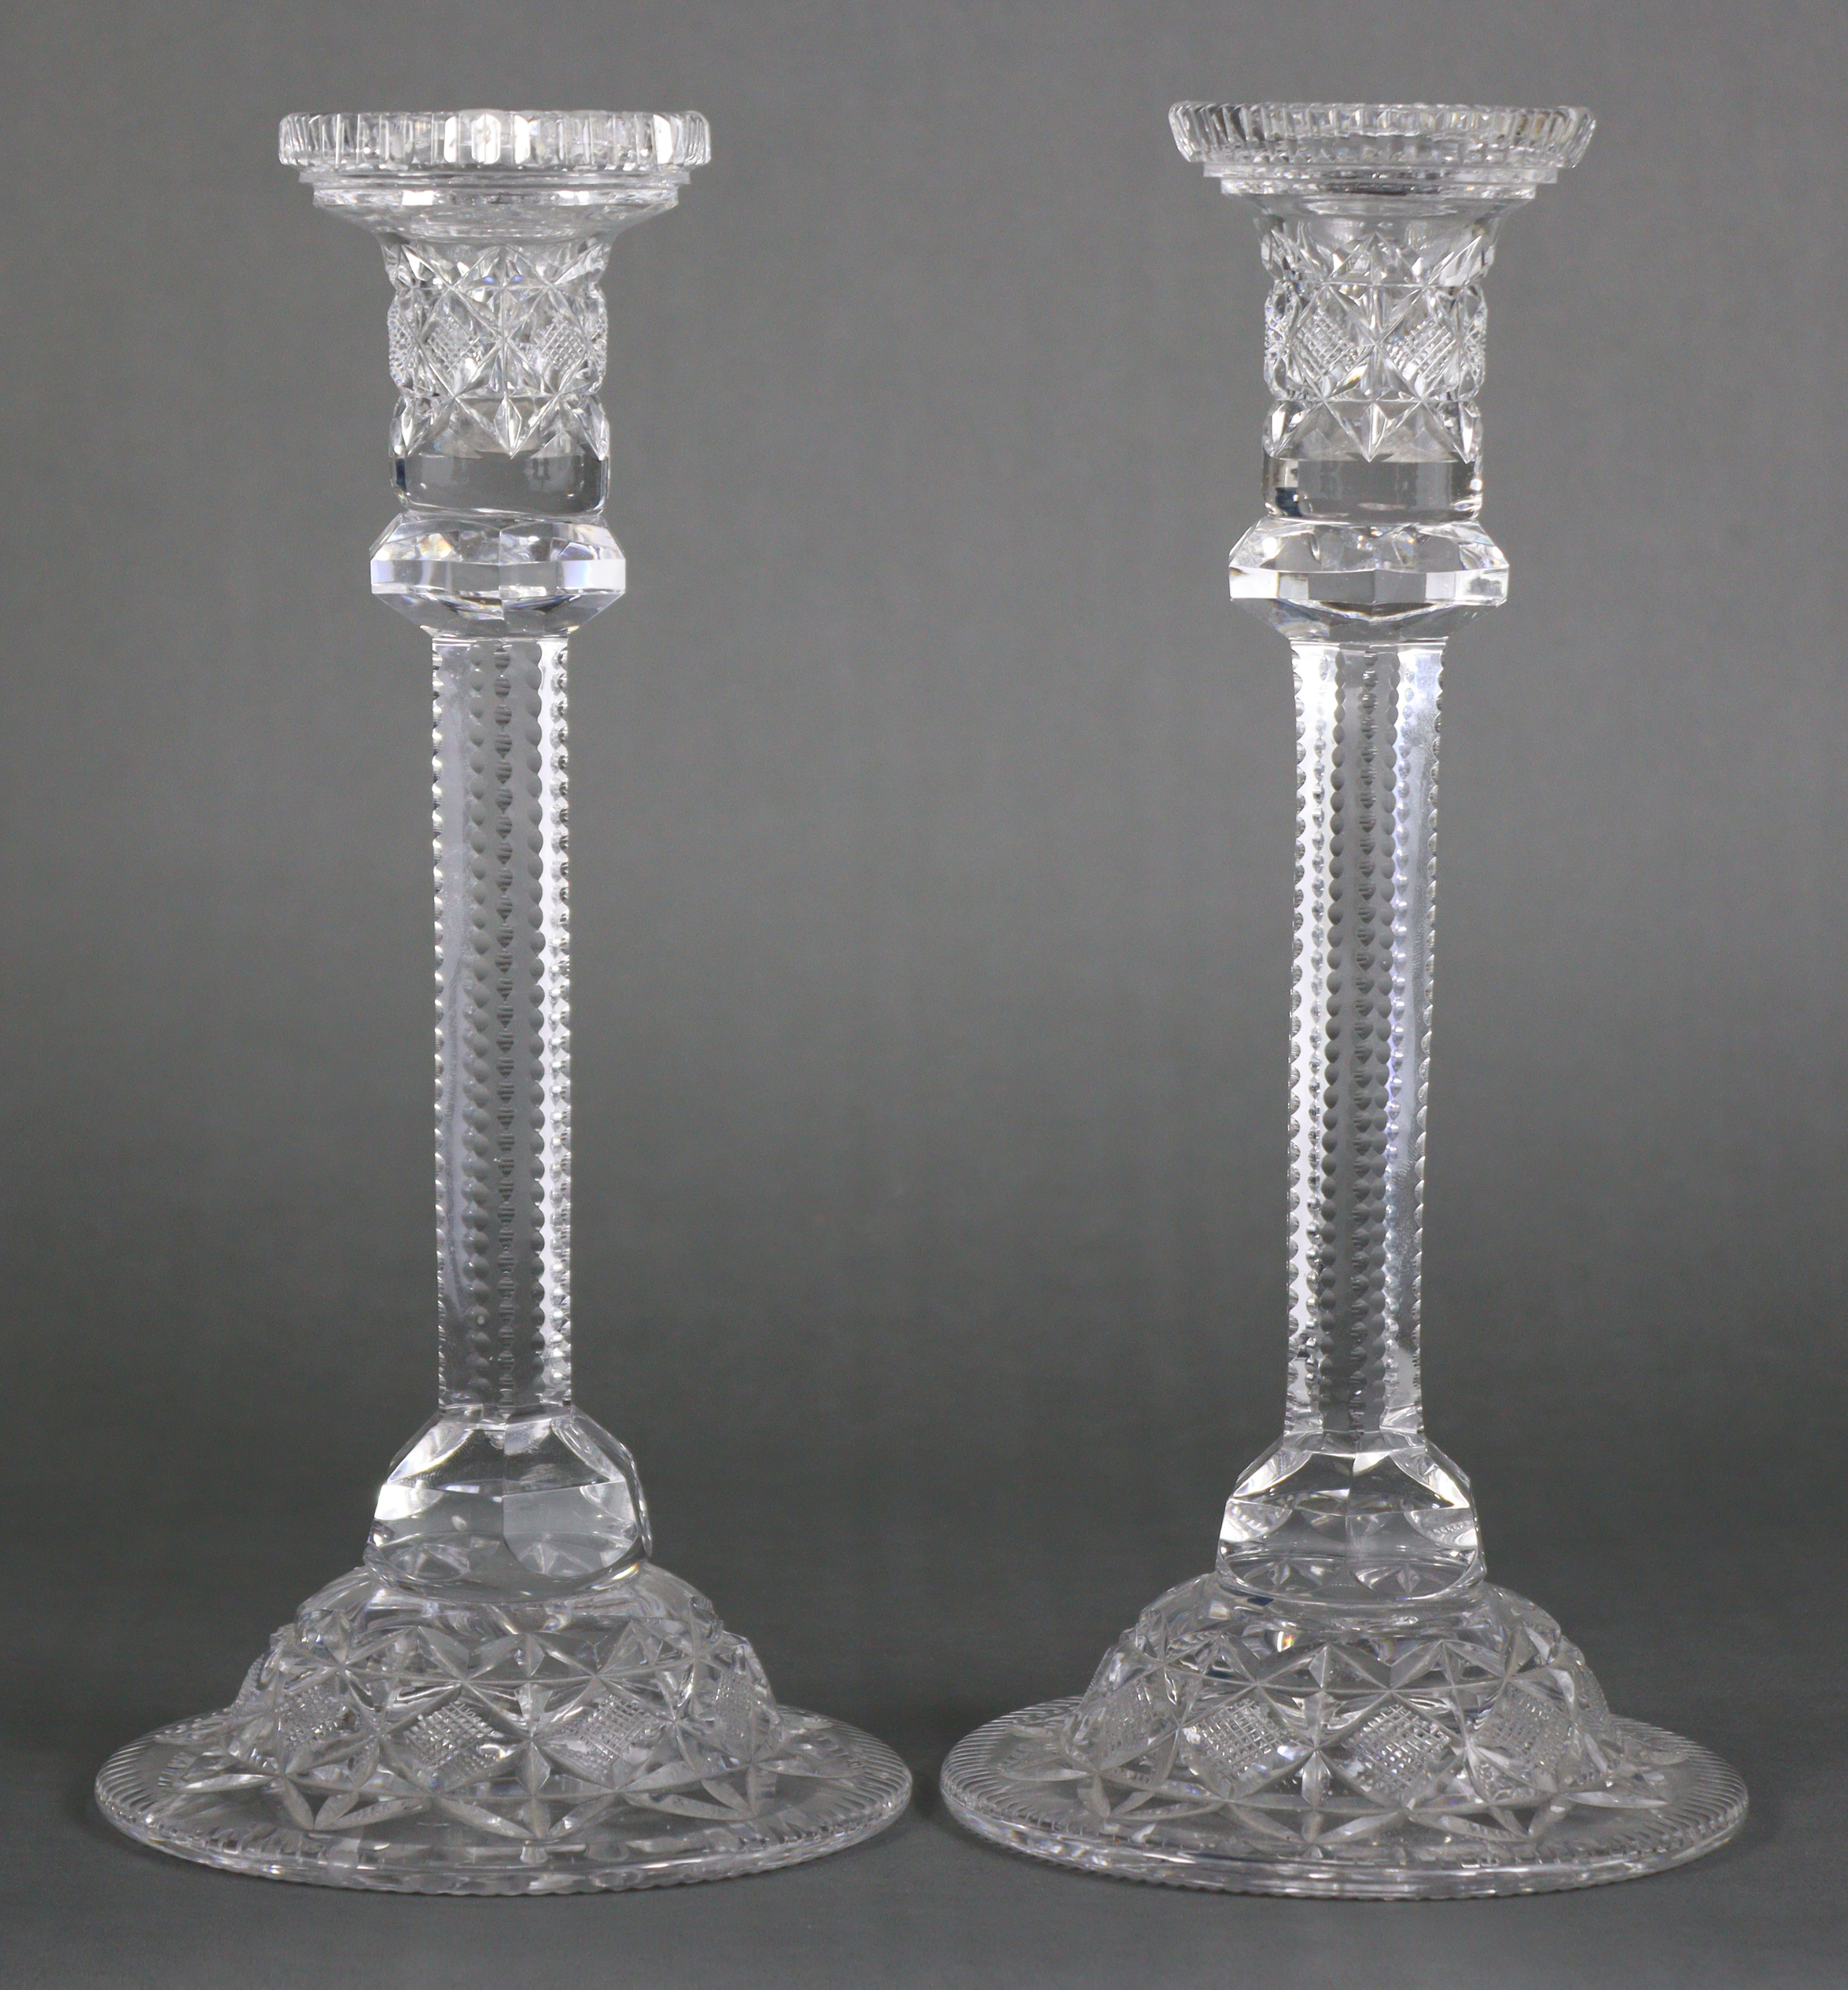 A pair of large cut-glass candlesticks, each with hobnail decoration, hexagonal faceted column, &